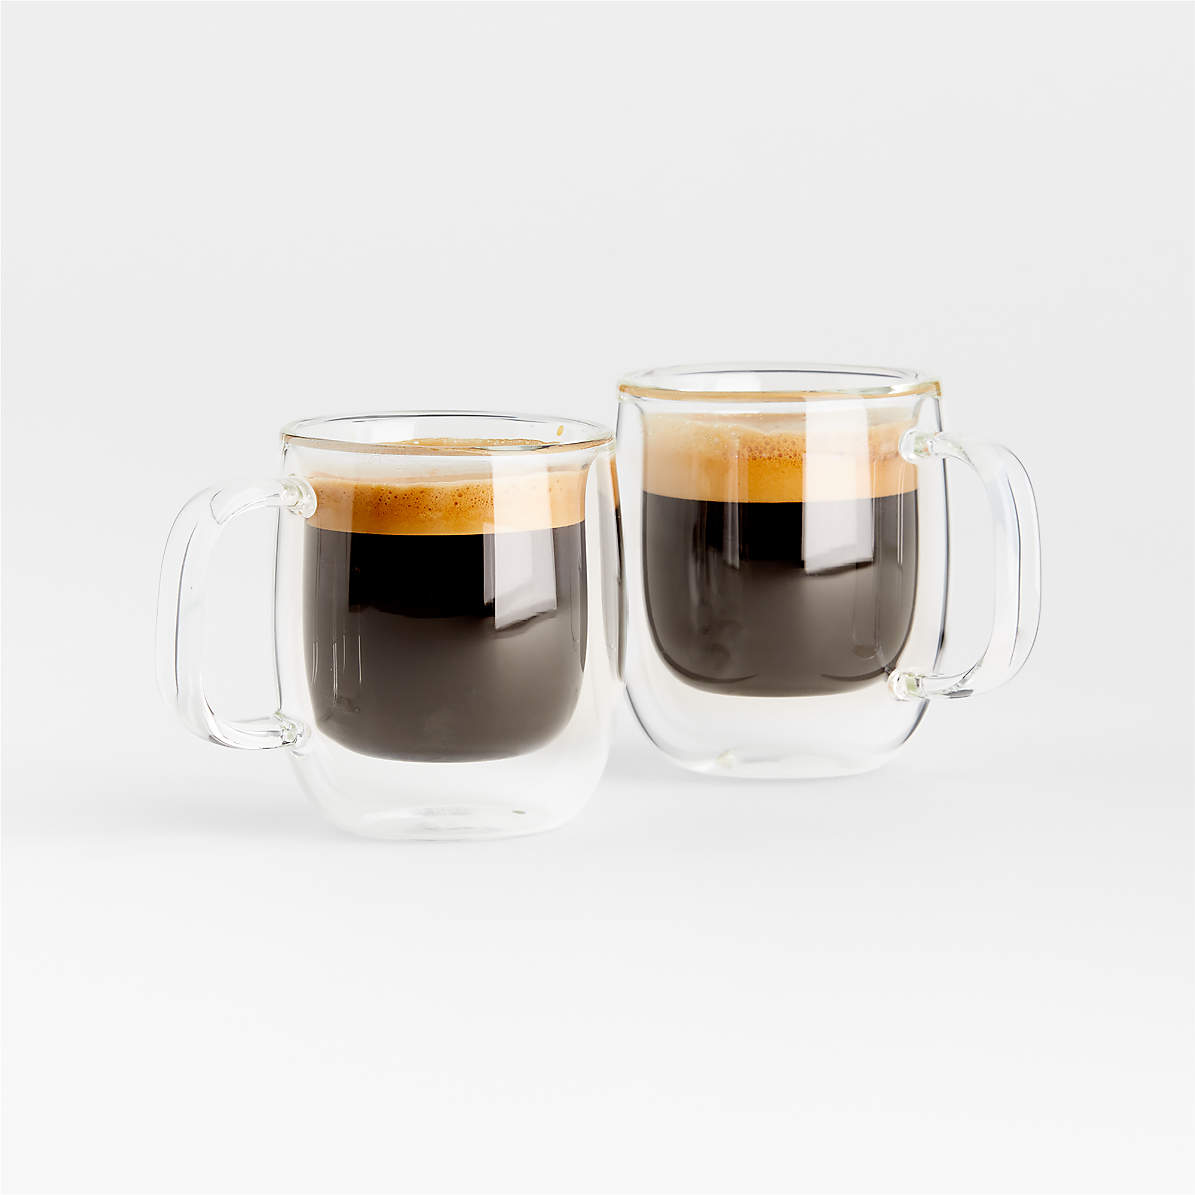 https://cb.scene7.com/is/image/Crate/ZwillingSrnPEspGlsMg2p7zS2SSF23/$web_pdp_main_carousel_zoom_med$/230530135714/zwilling-sorrento-plus-espresso-glass-mugs-2-piece.jpg